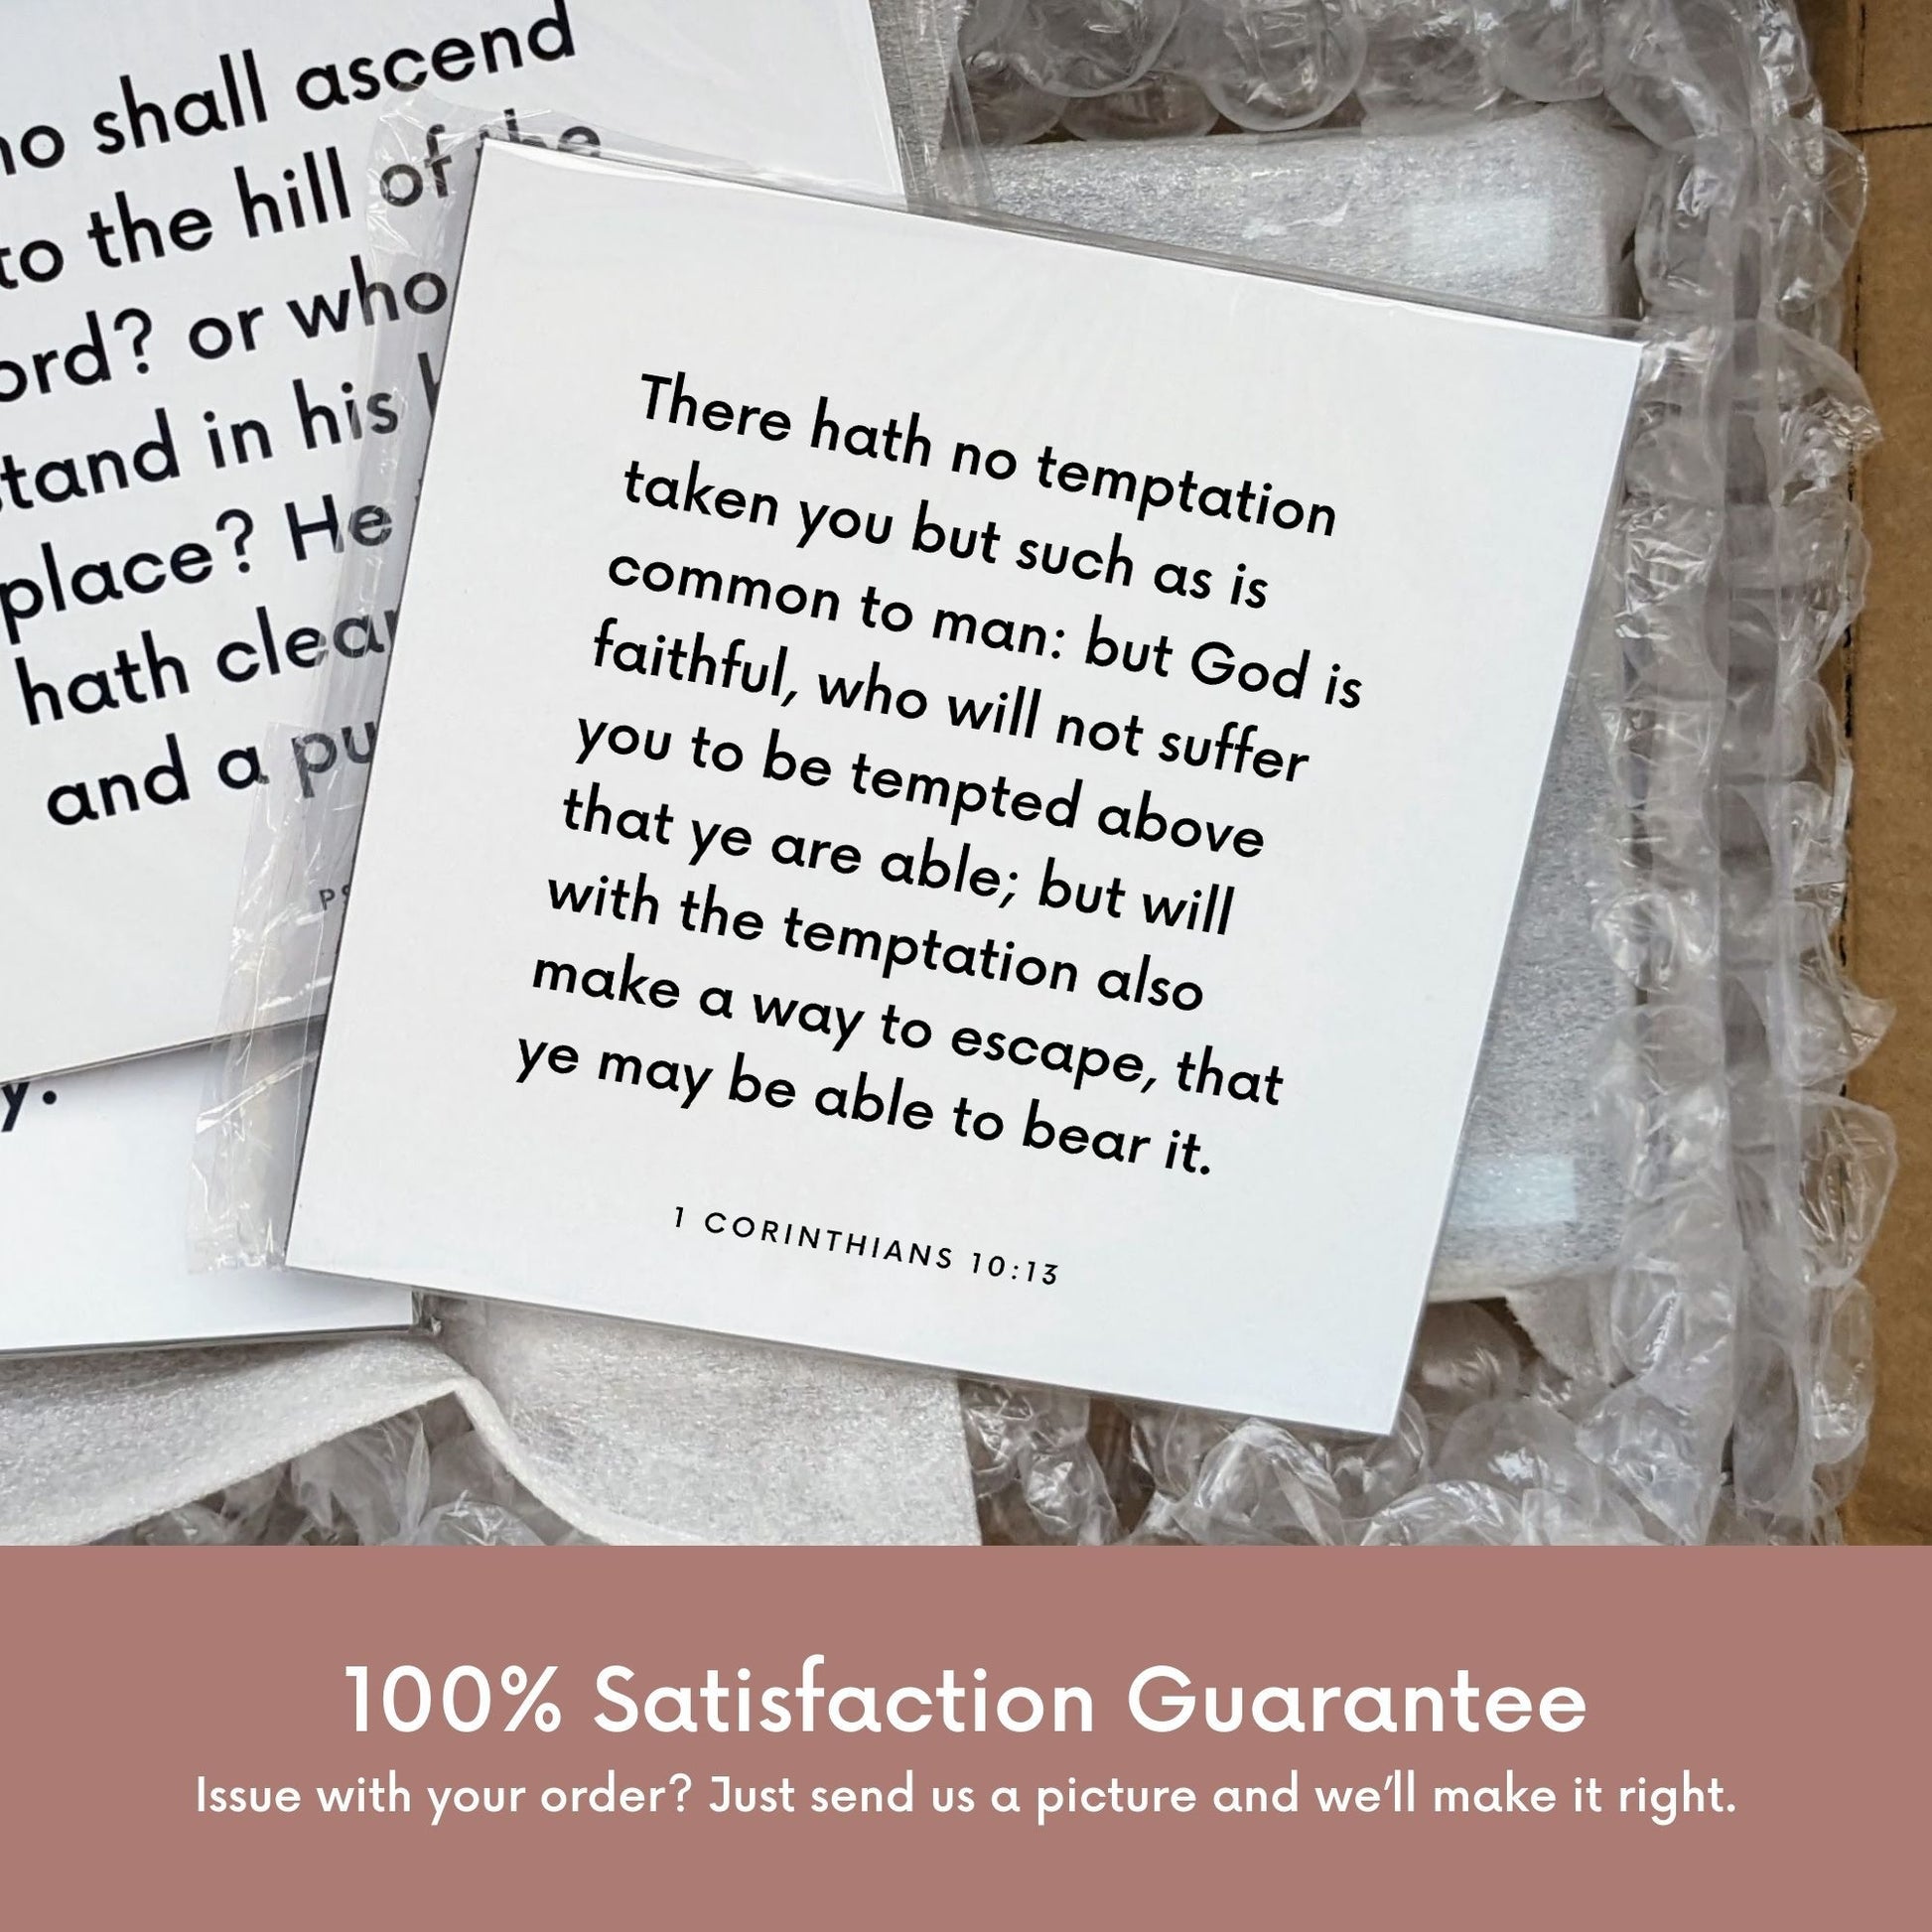 Shipping materials for scripture tile of 1 Corinthians 10:13 - "God will not suffer you to be tempted above that ye are able"